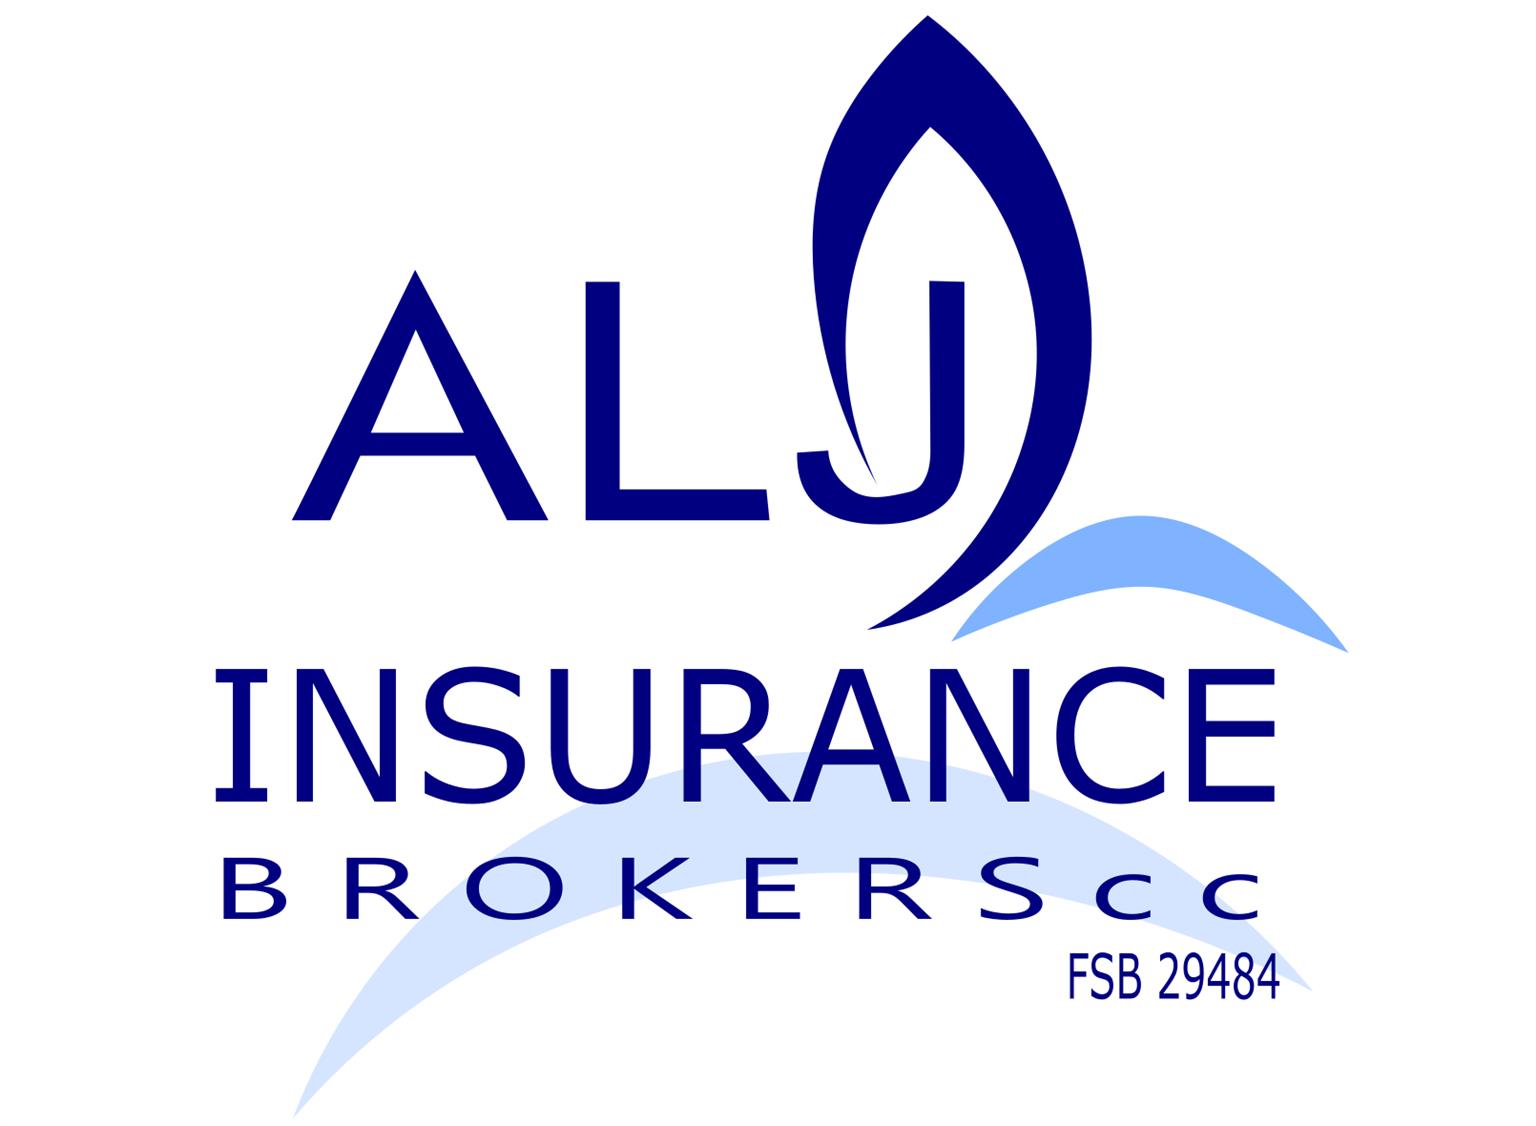 Looking for Easy, and Affordable Motor, House, or Business Insurance??